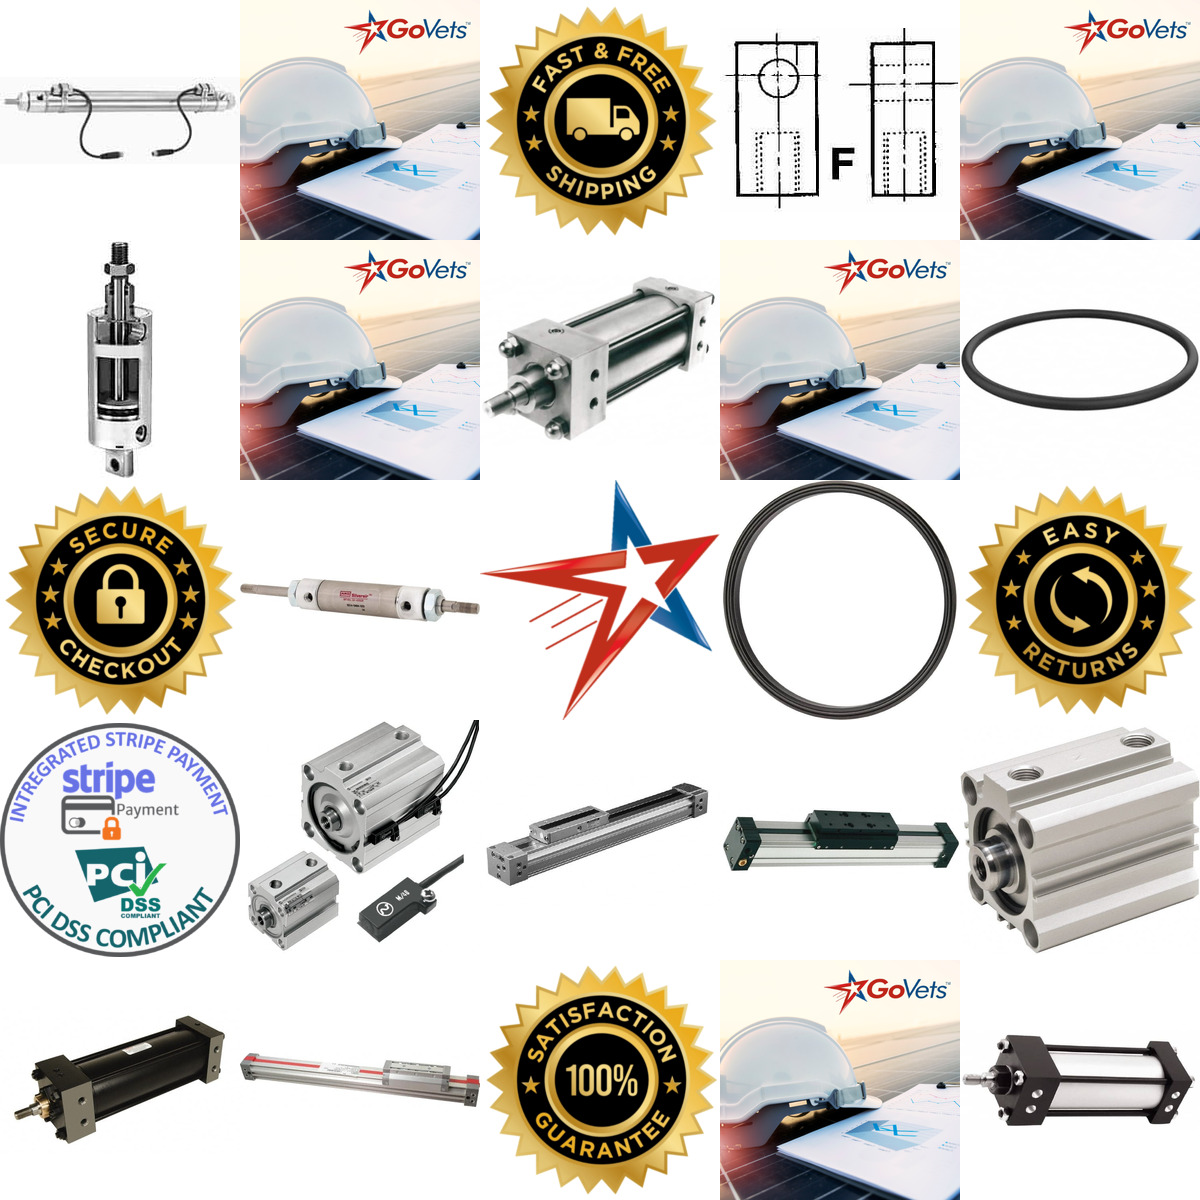 A selection of Air Cylinders and Accessories products on GoVets